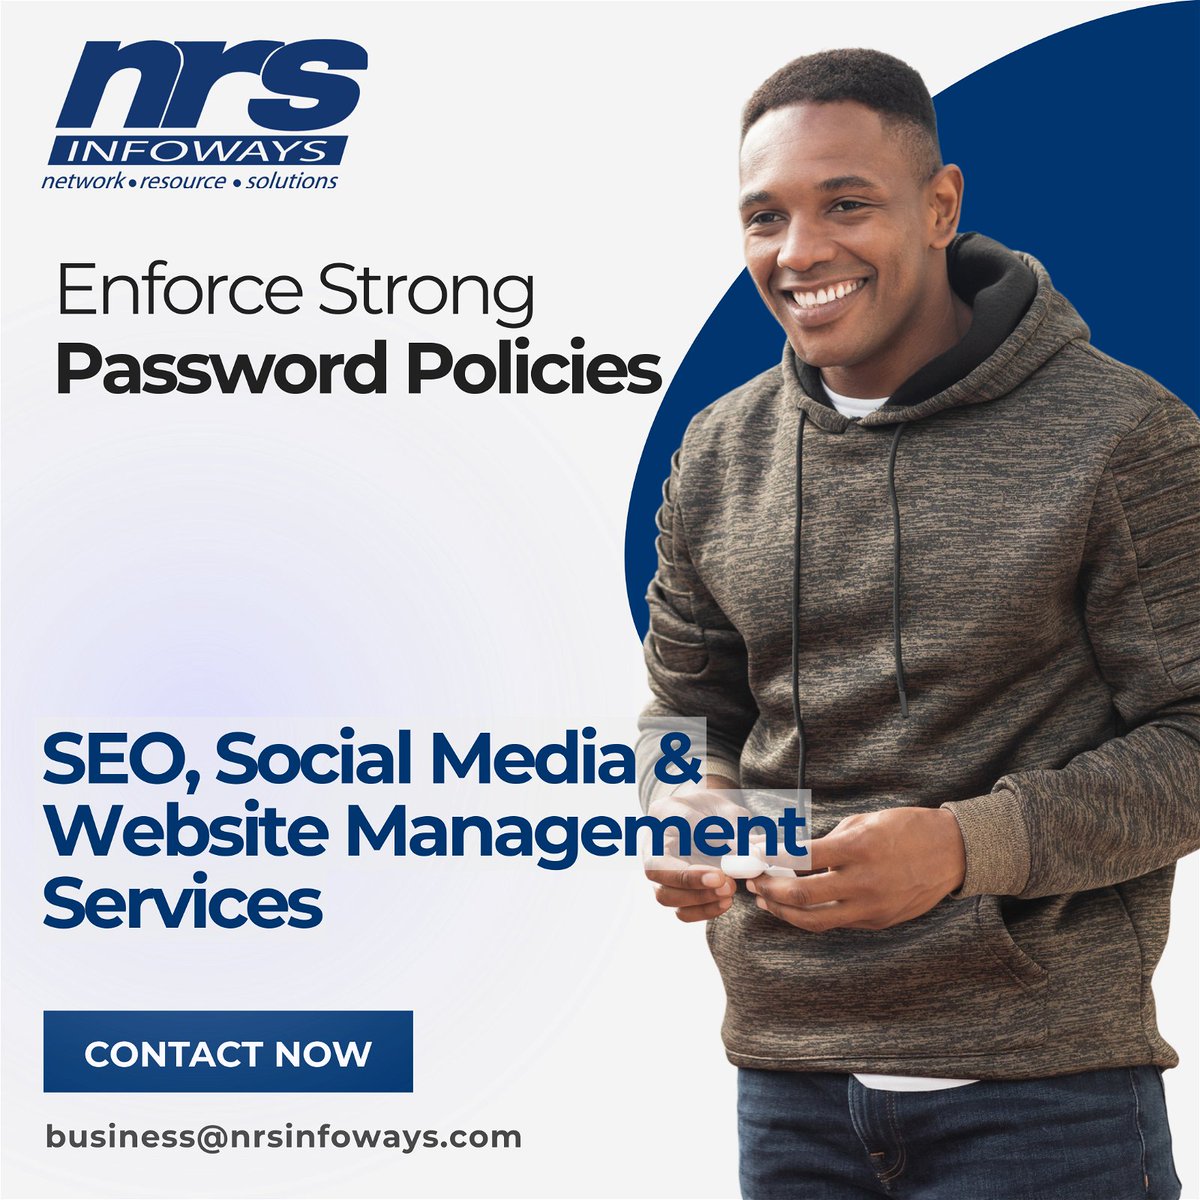 Enforce Strong Password Policies

Enforcing strong password policies can significantly enhance the security of your website. Encourage users to create complex passwords.

We can help
Lets discuss business@nrsinfoways.com
#passwordsecurity #strongpasswords #seo #nrsinfoways